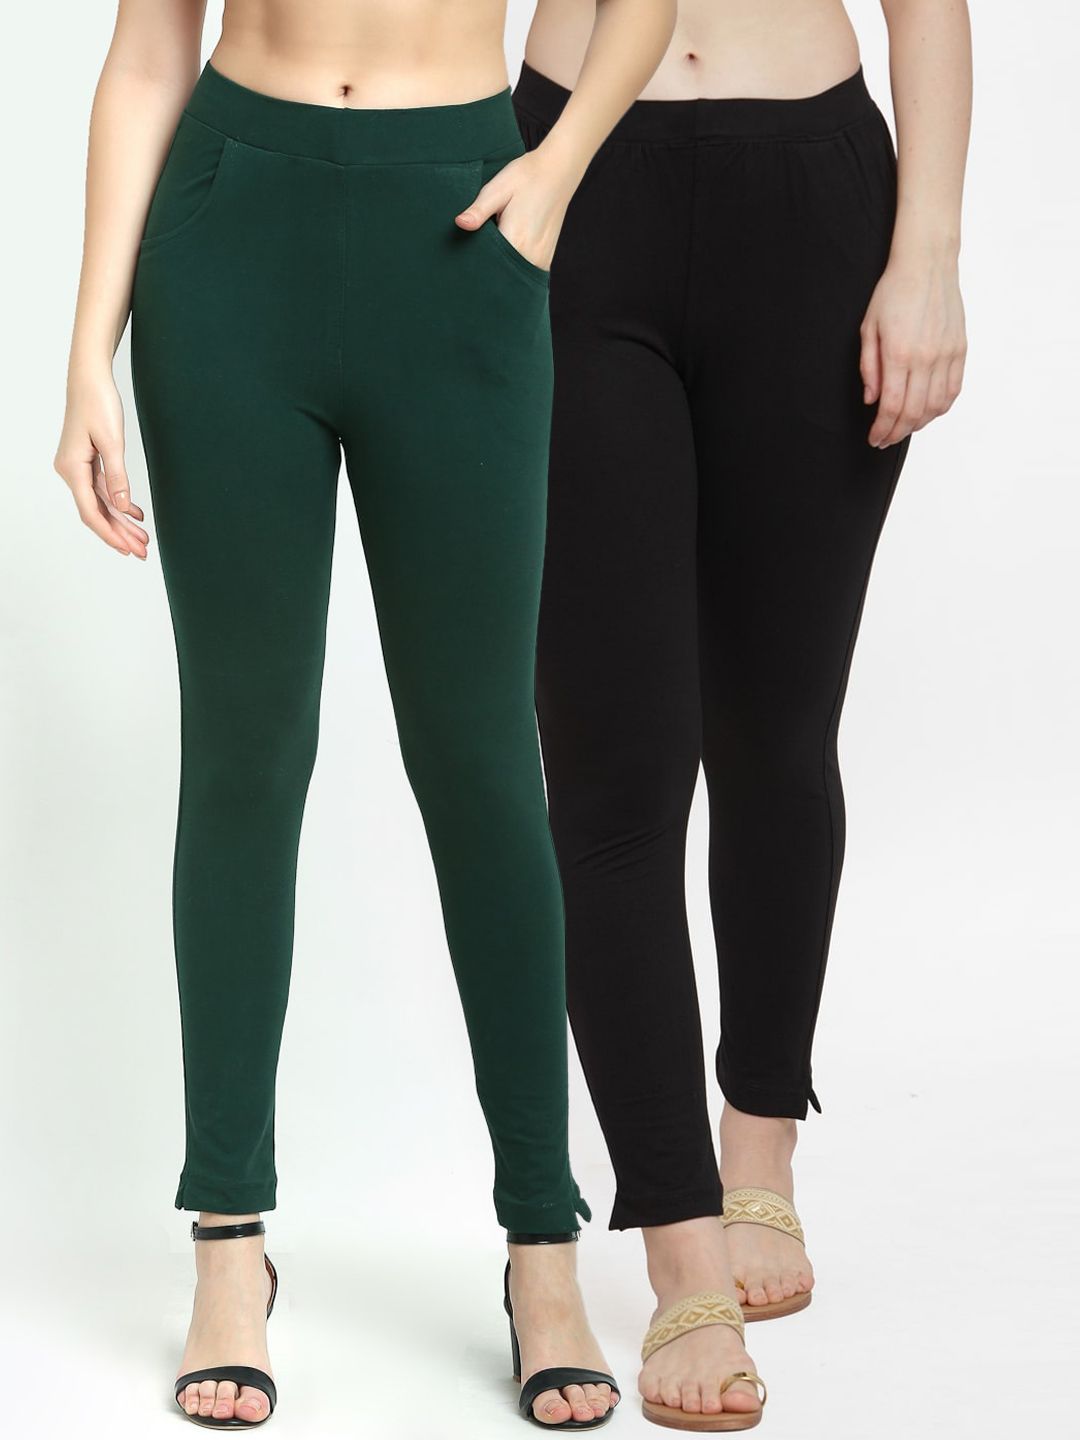 TAG 7 Women Set of 2 Green & Black Solid Ankle-Length Leggings Price in India